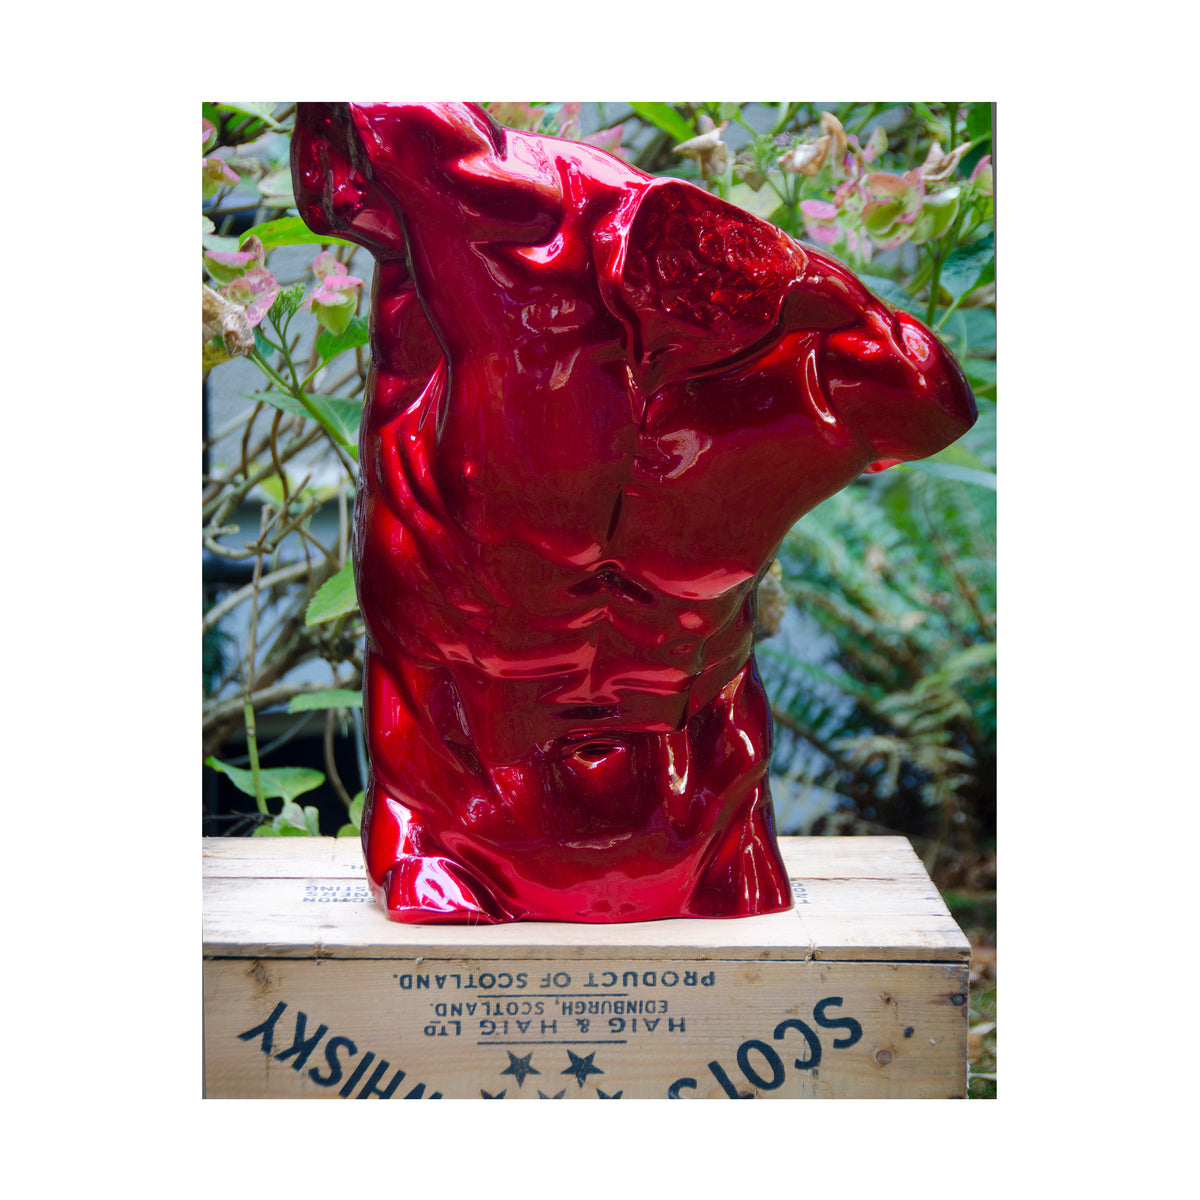 Sculptural torso bust of male figure painted in bright candy apple red, the bust is on top of a wooden whiskey crate outside , he is surrounded by green foliage with green and burgundy flowers amongst the greenery.